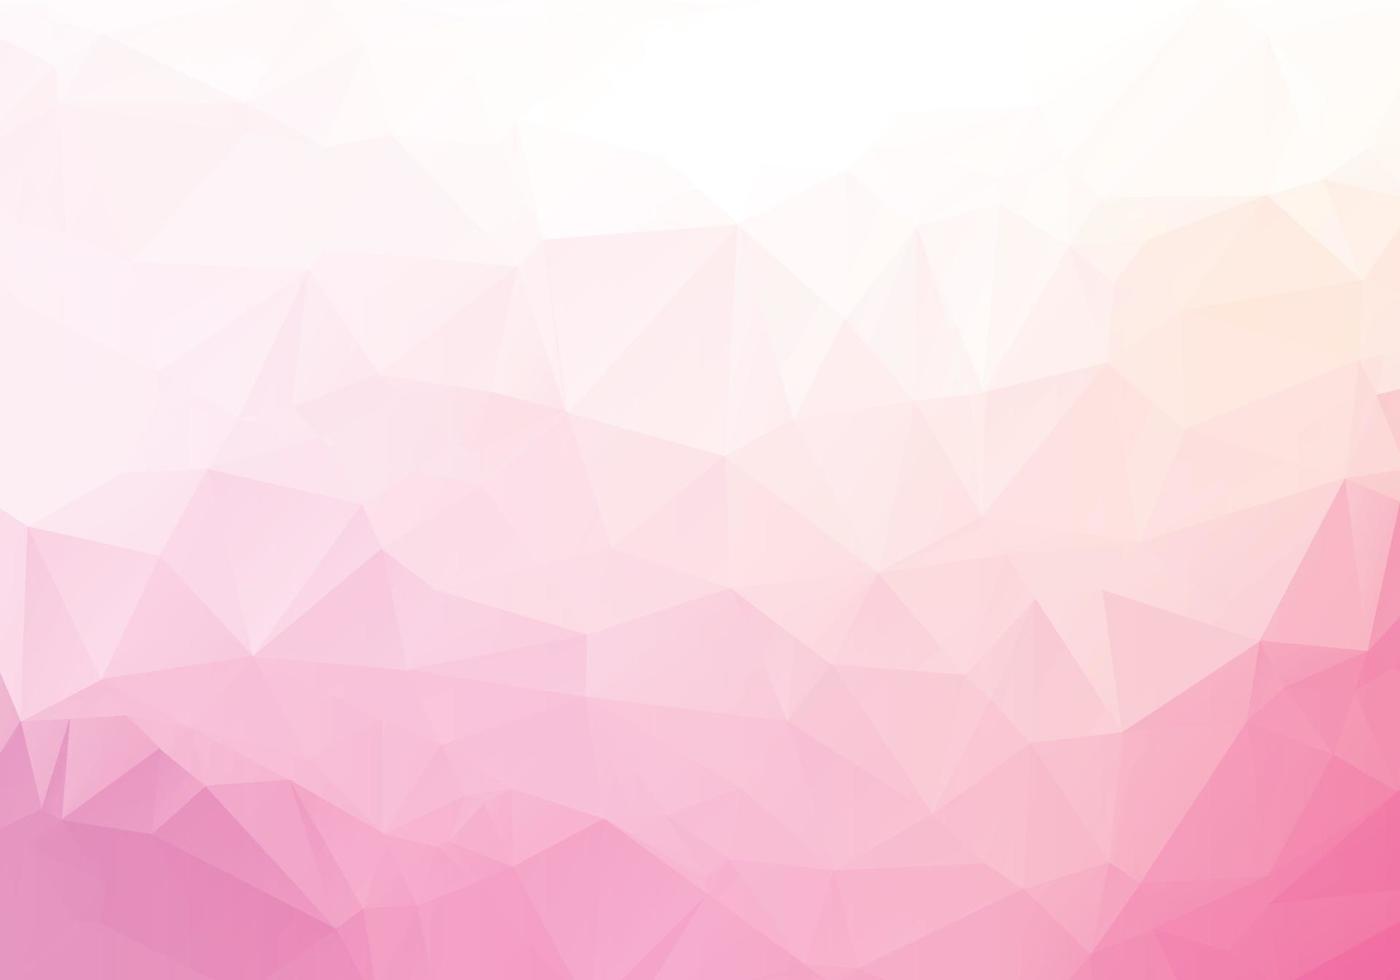 Abstract light pink low poly geometric background vector